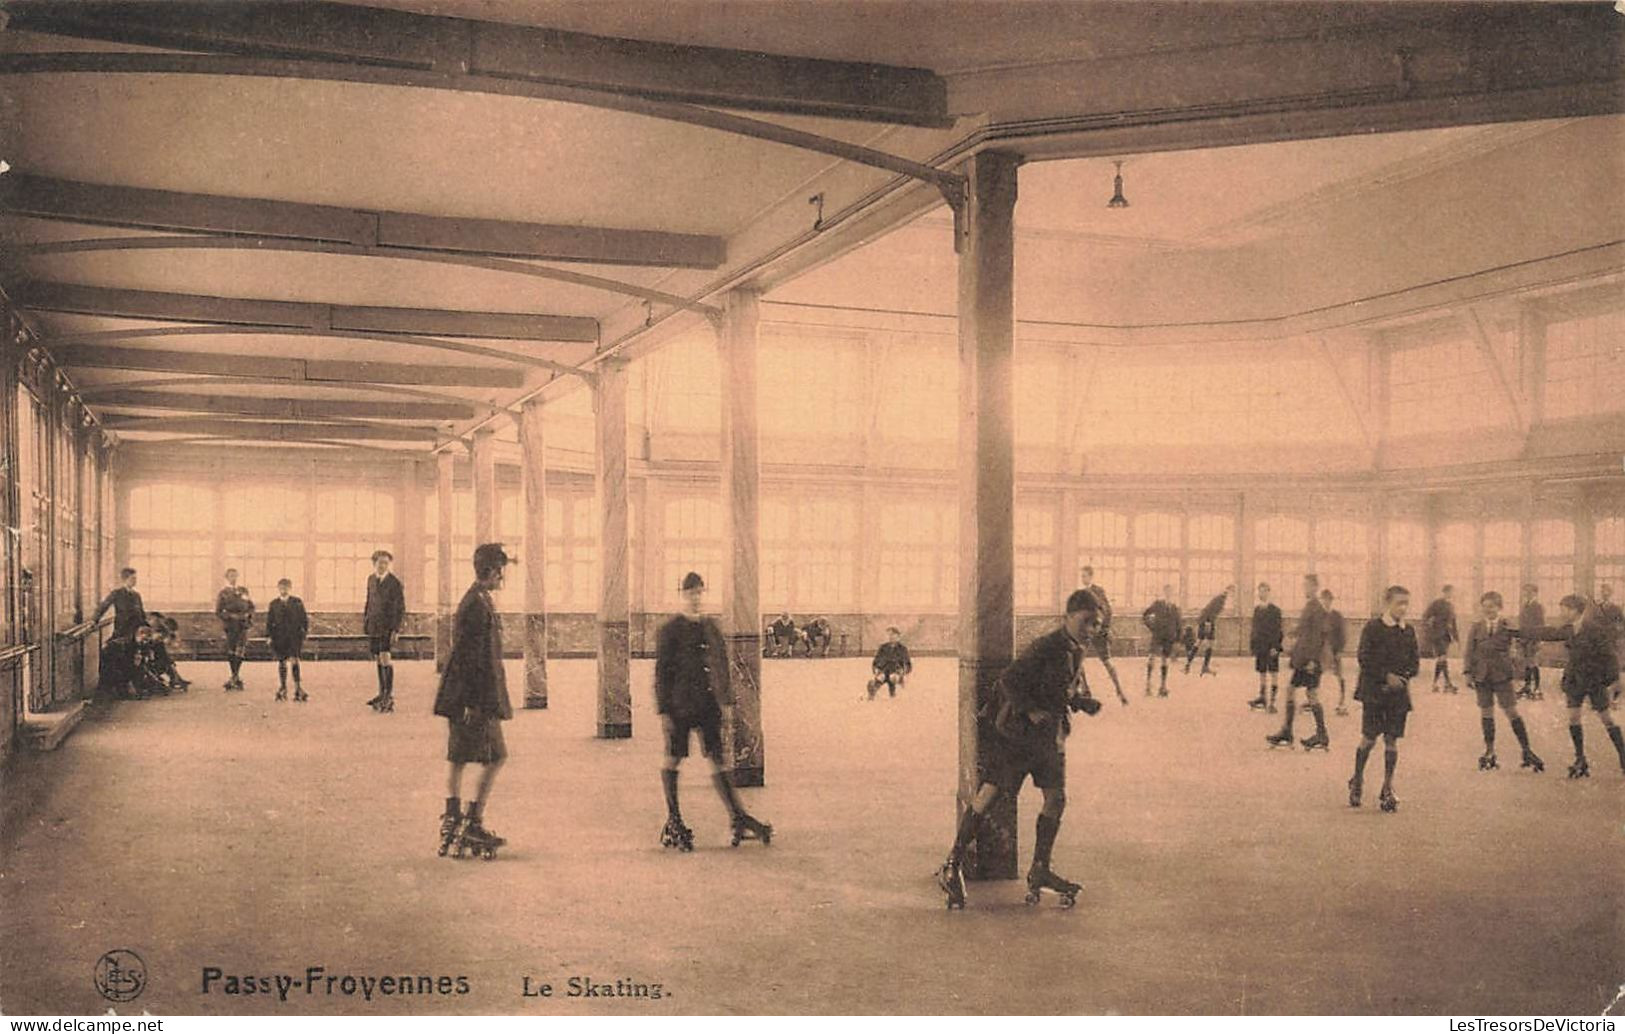 BELGIQUE - Passy Froyennes - Le Skating - Carte Postale Ancienne - Tournai